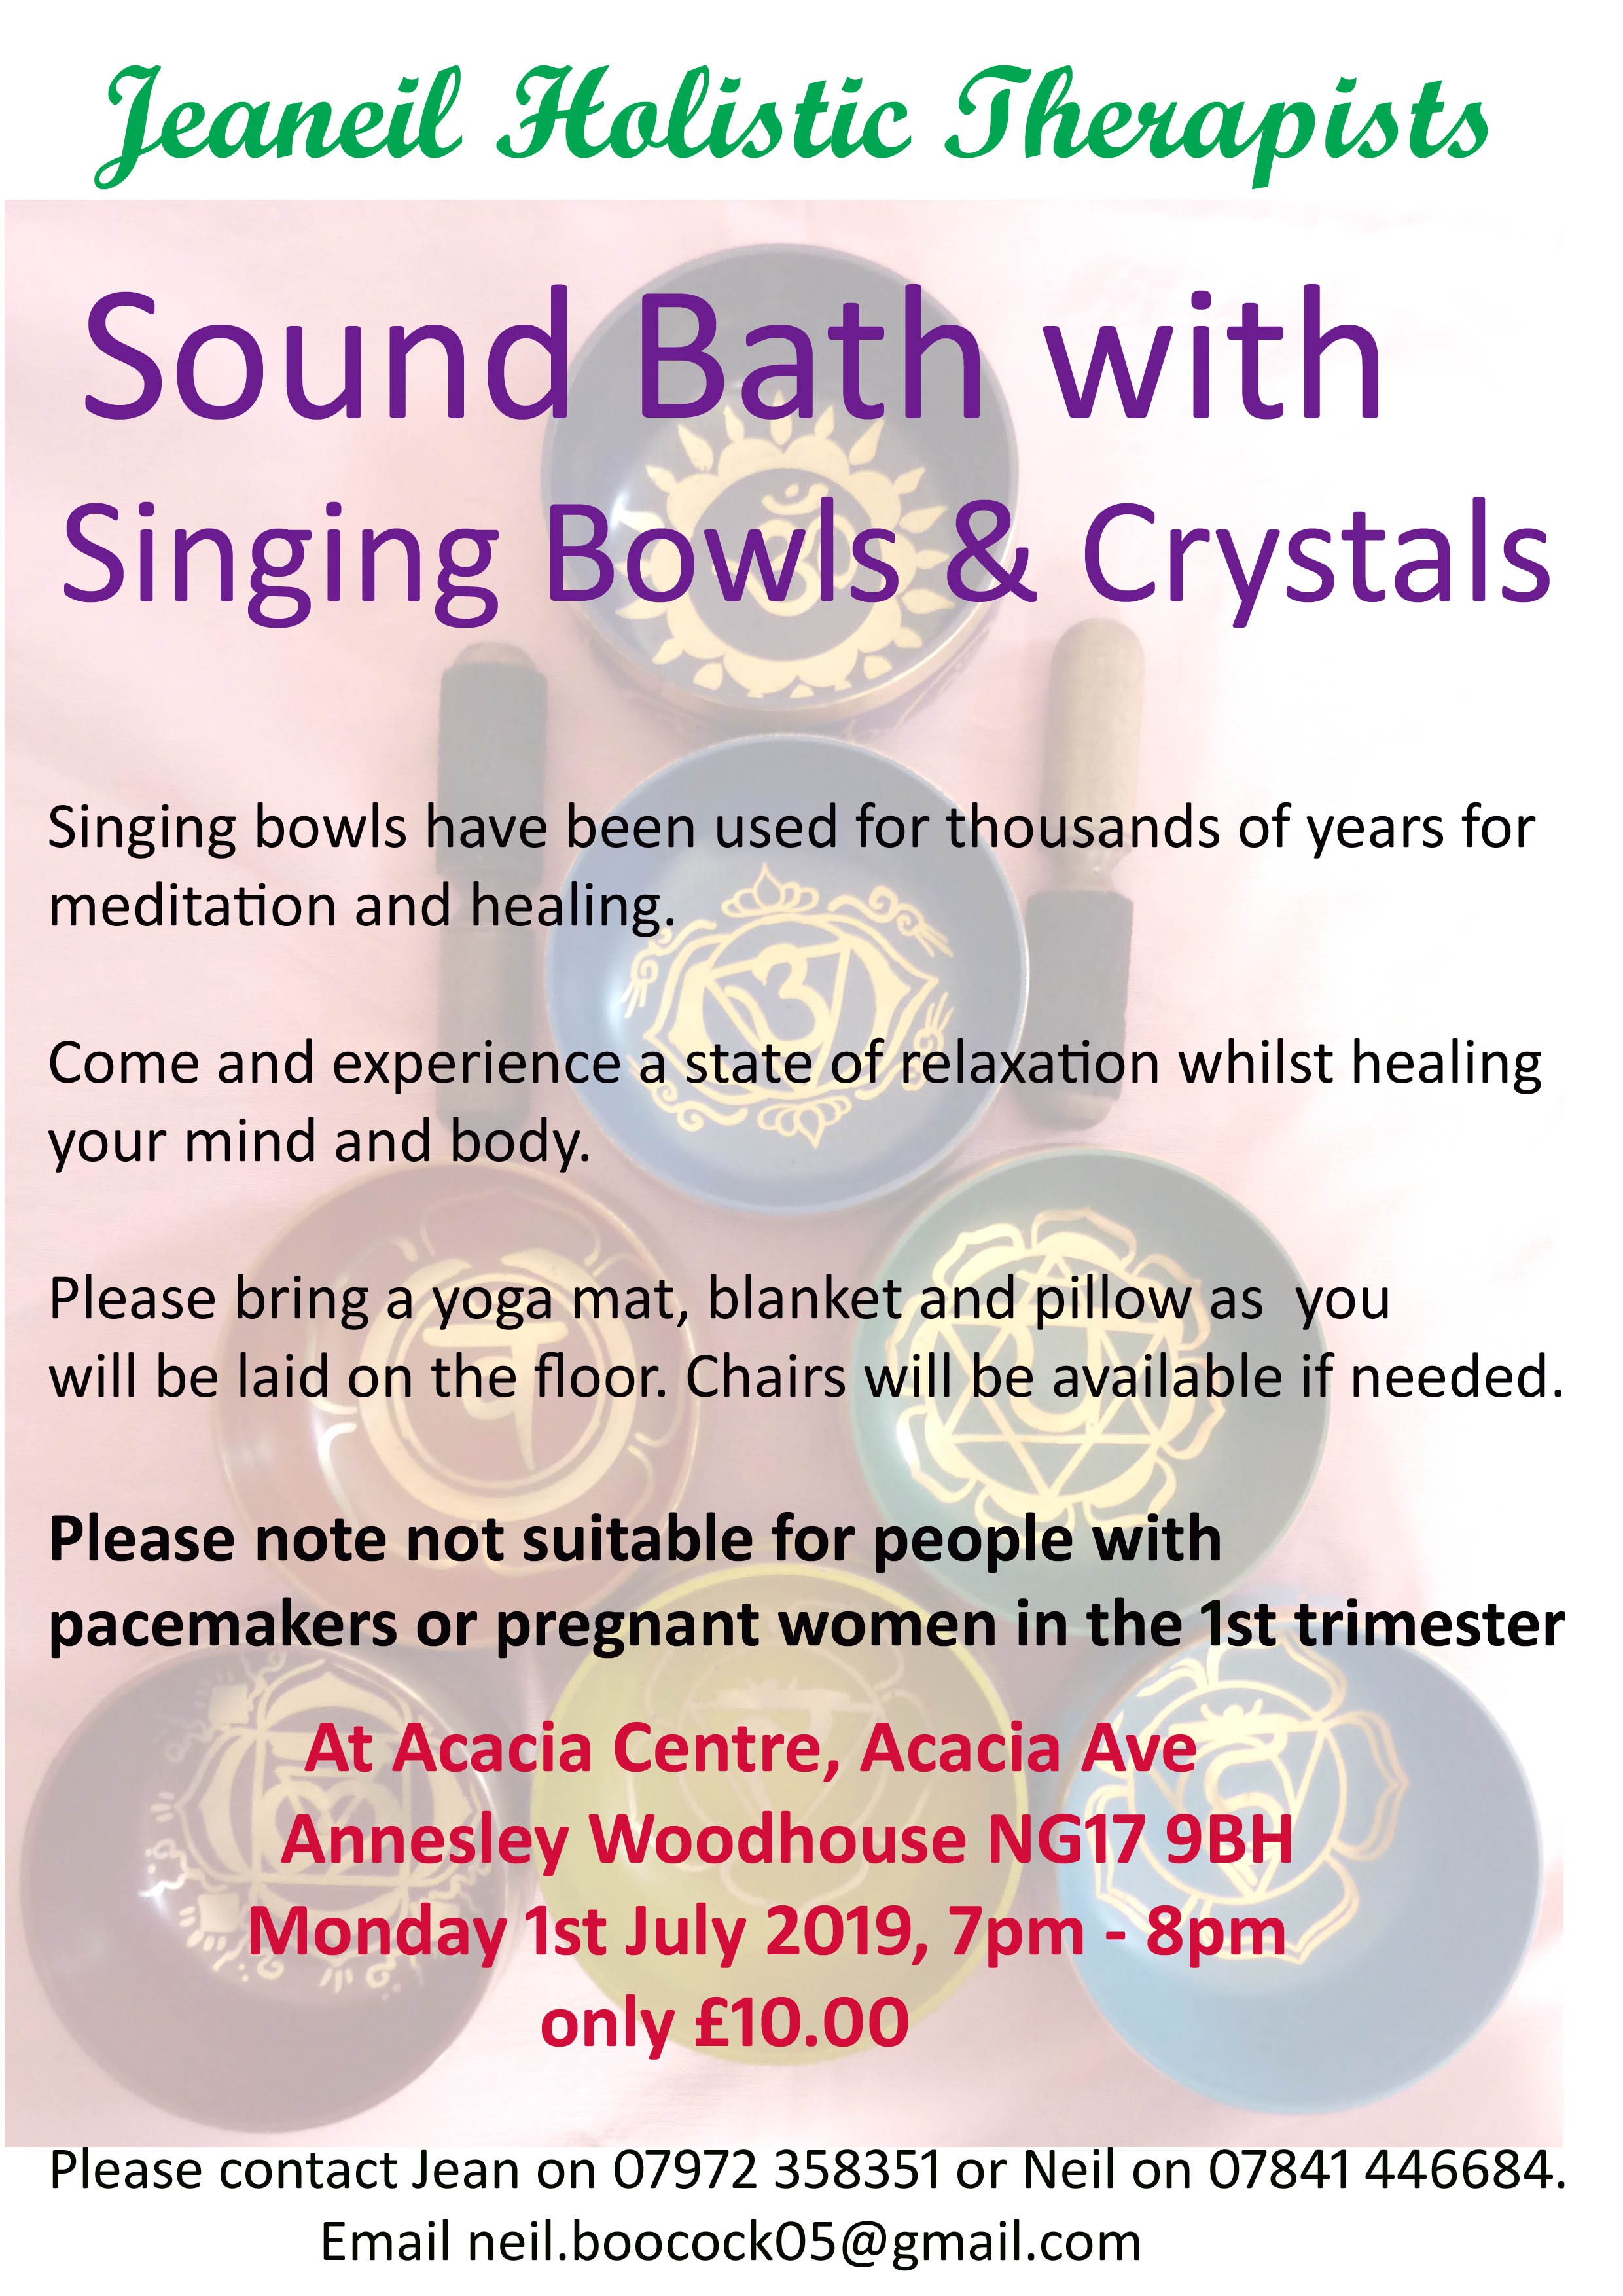 NOTTINGHAMSHIRE - Sound Bath with Singing Bowls and Crystals